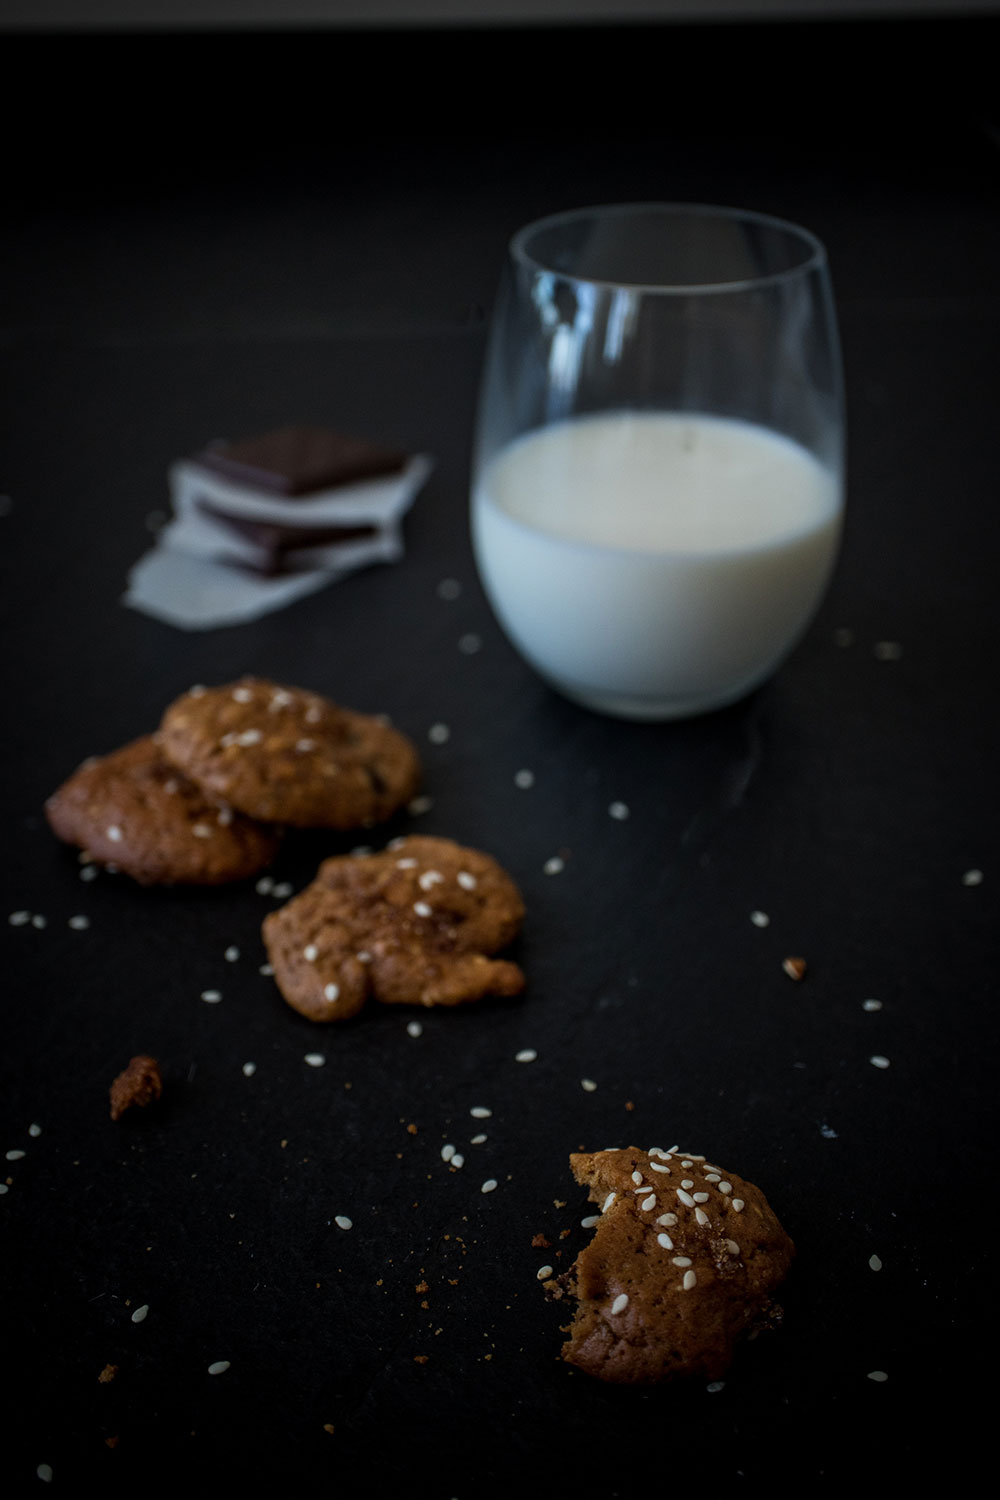 Date syrup, sesame oil and dark chocolate biscuits